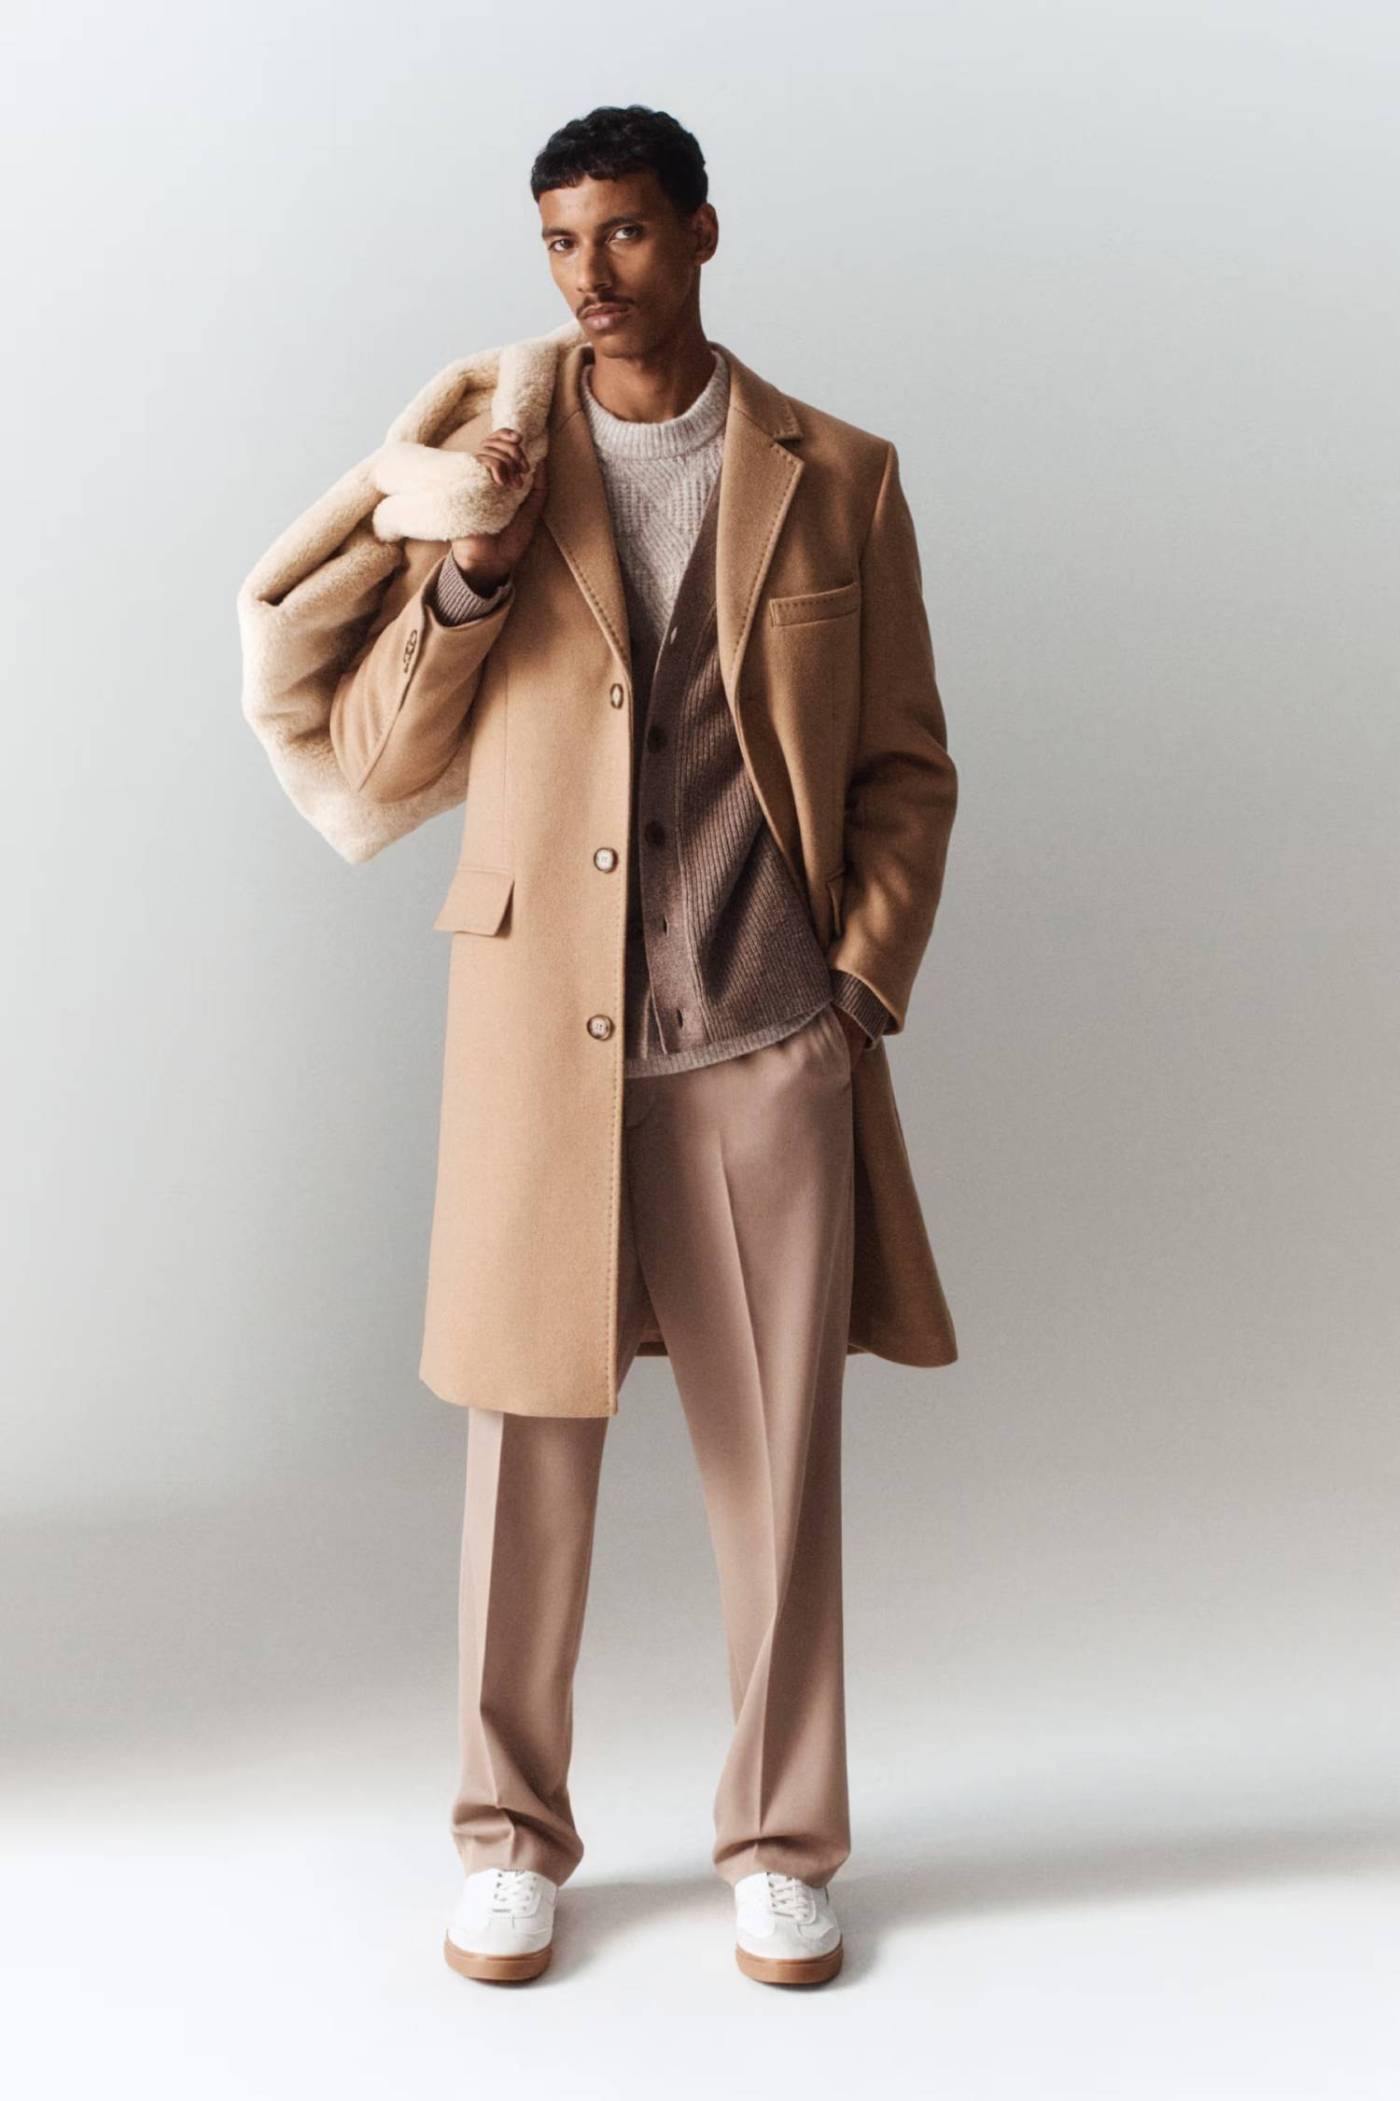 Mohamed Hassan by Markus Pritzi for H&M Man's Smart Fall Menswear 2023 Lookbook